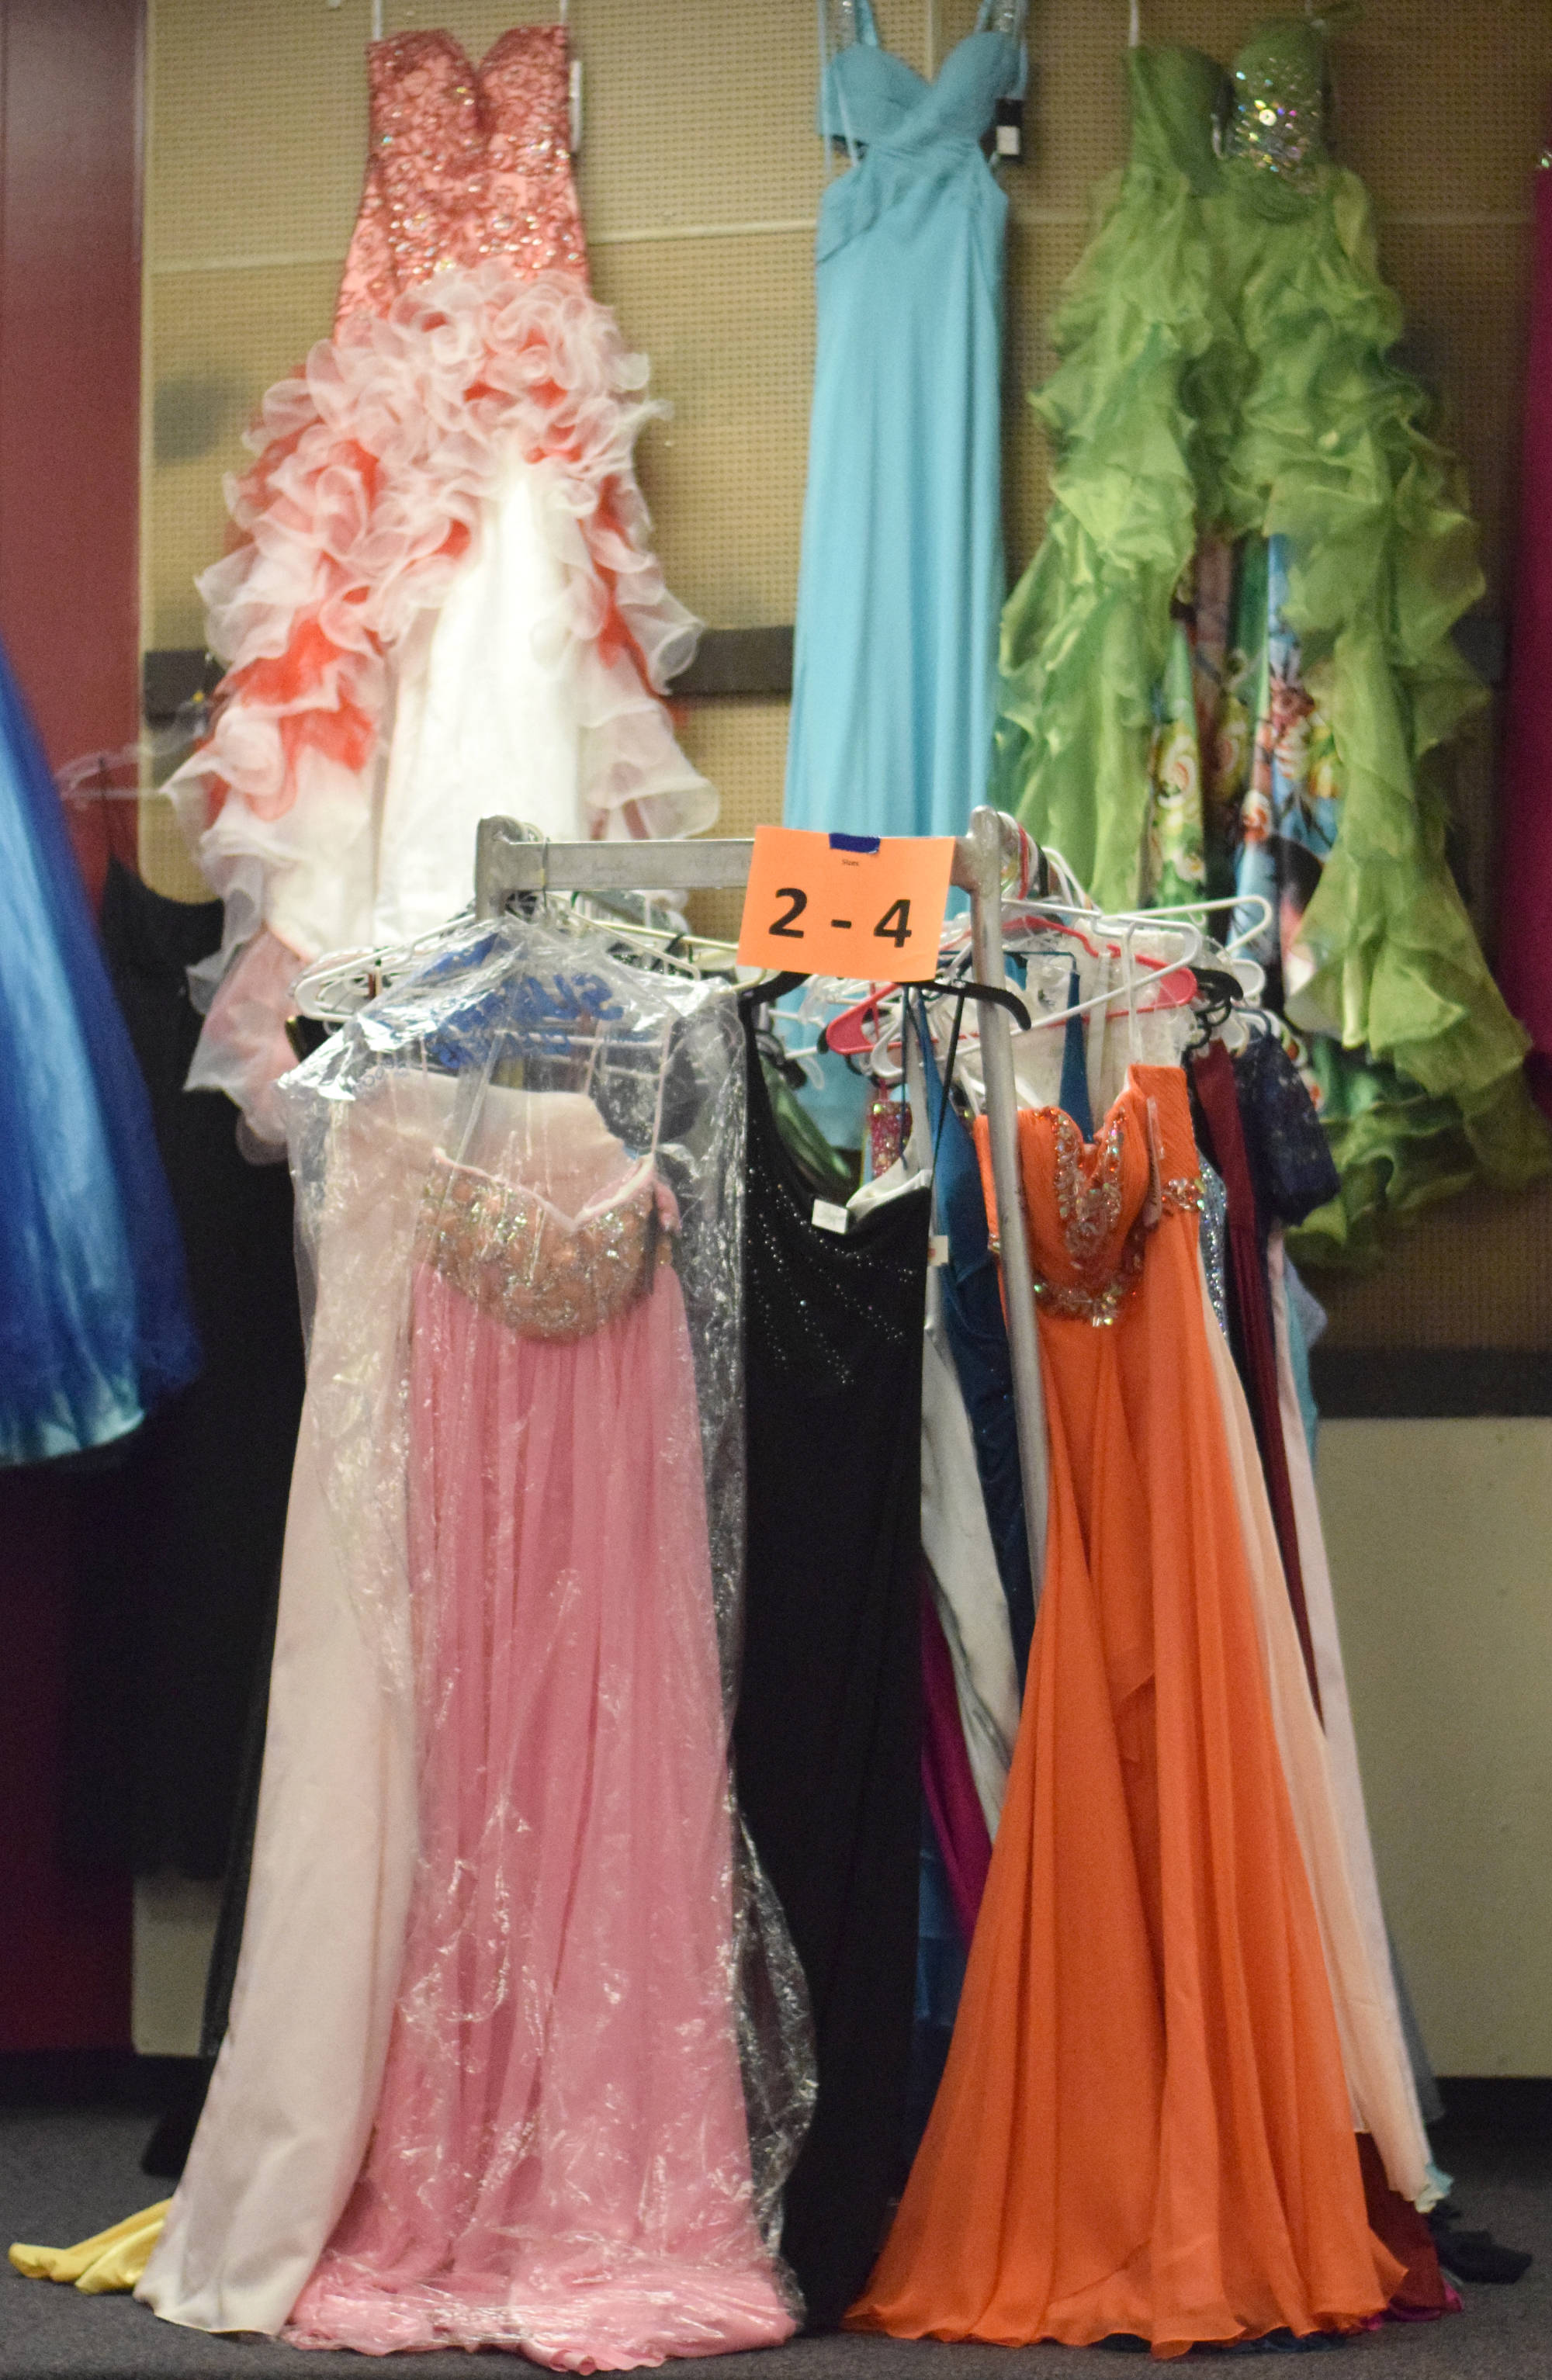 Dresses line the walls of Soldotna Prep School Friday for Cinderella’s Closet, a program that provides free prom dresses and accessories to girls throughout the school district. (Photo by Kat Sorensen/Peninsula Clarion)